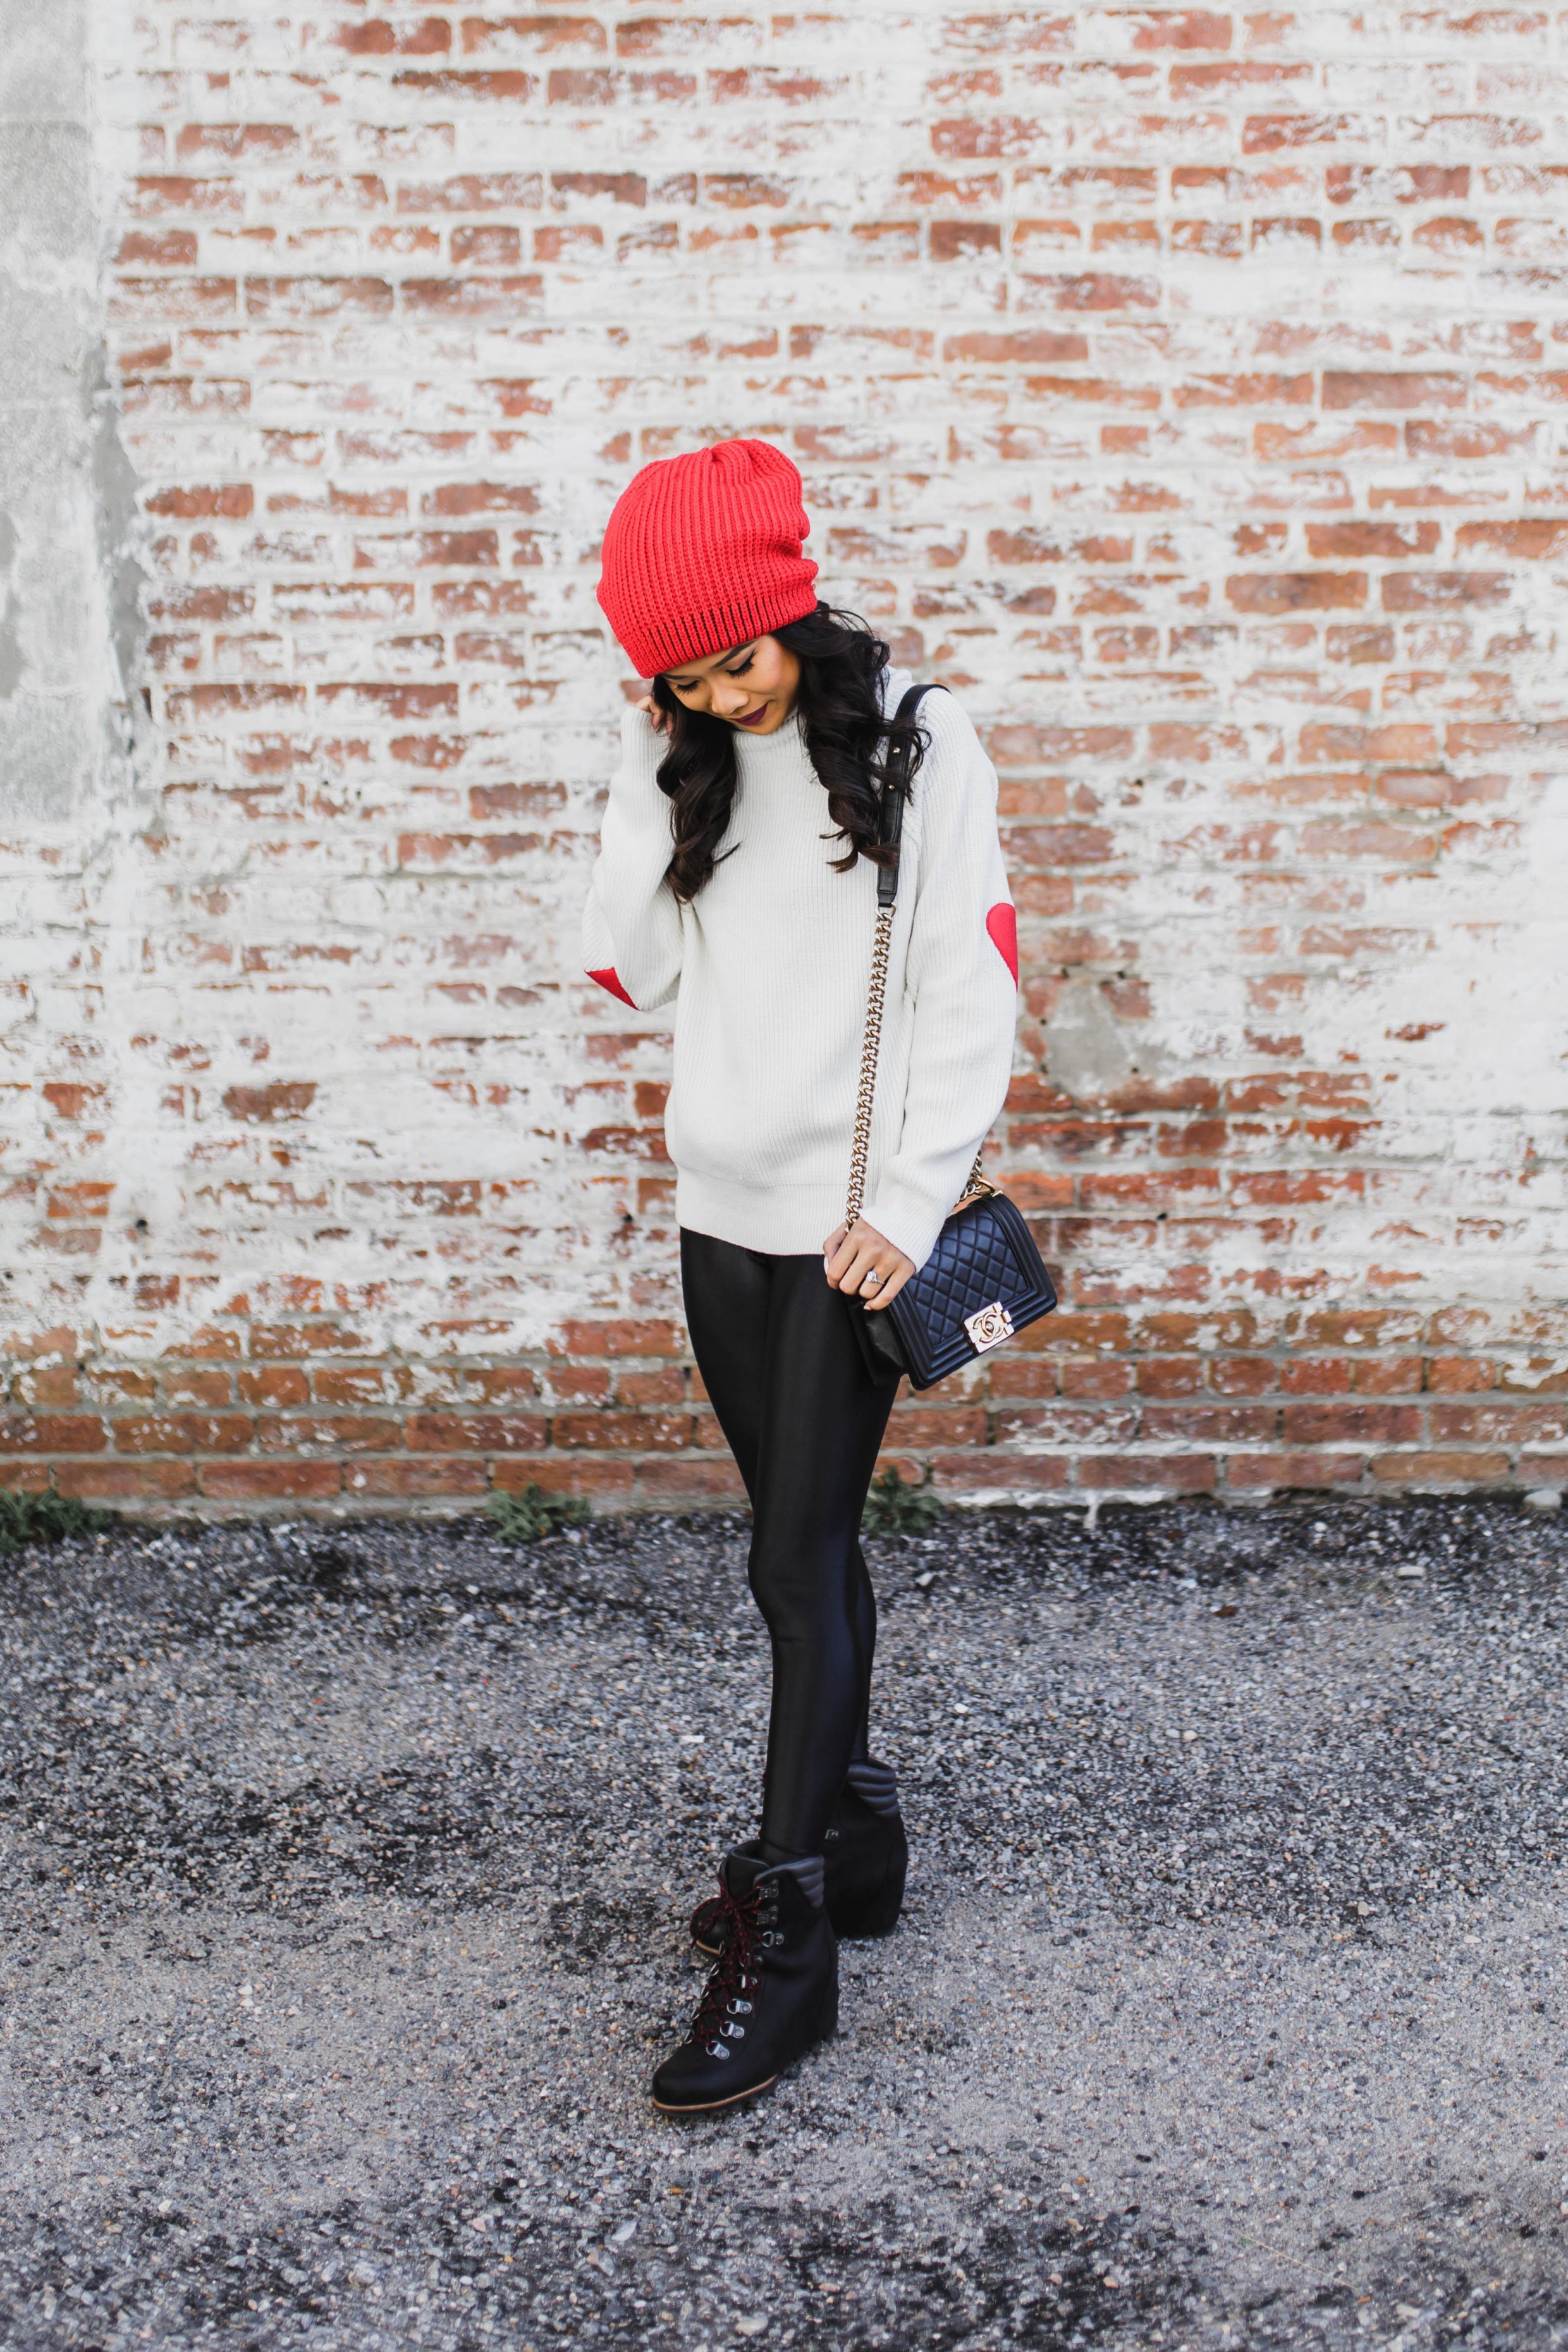 Heart on My Sleeve :: Heart Patch Sweater & Warm Boots - Color & Chic